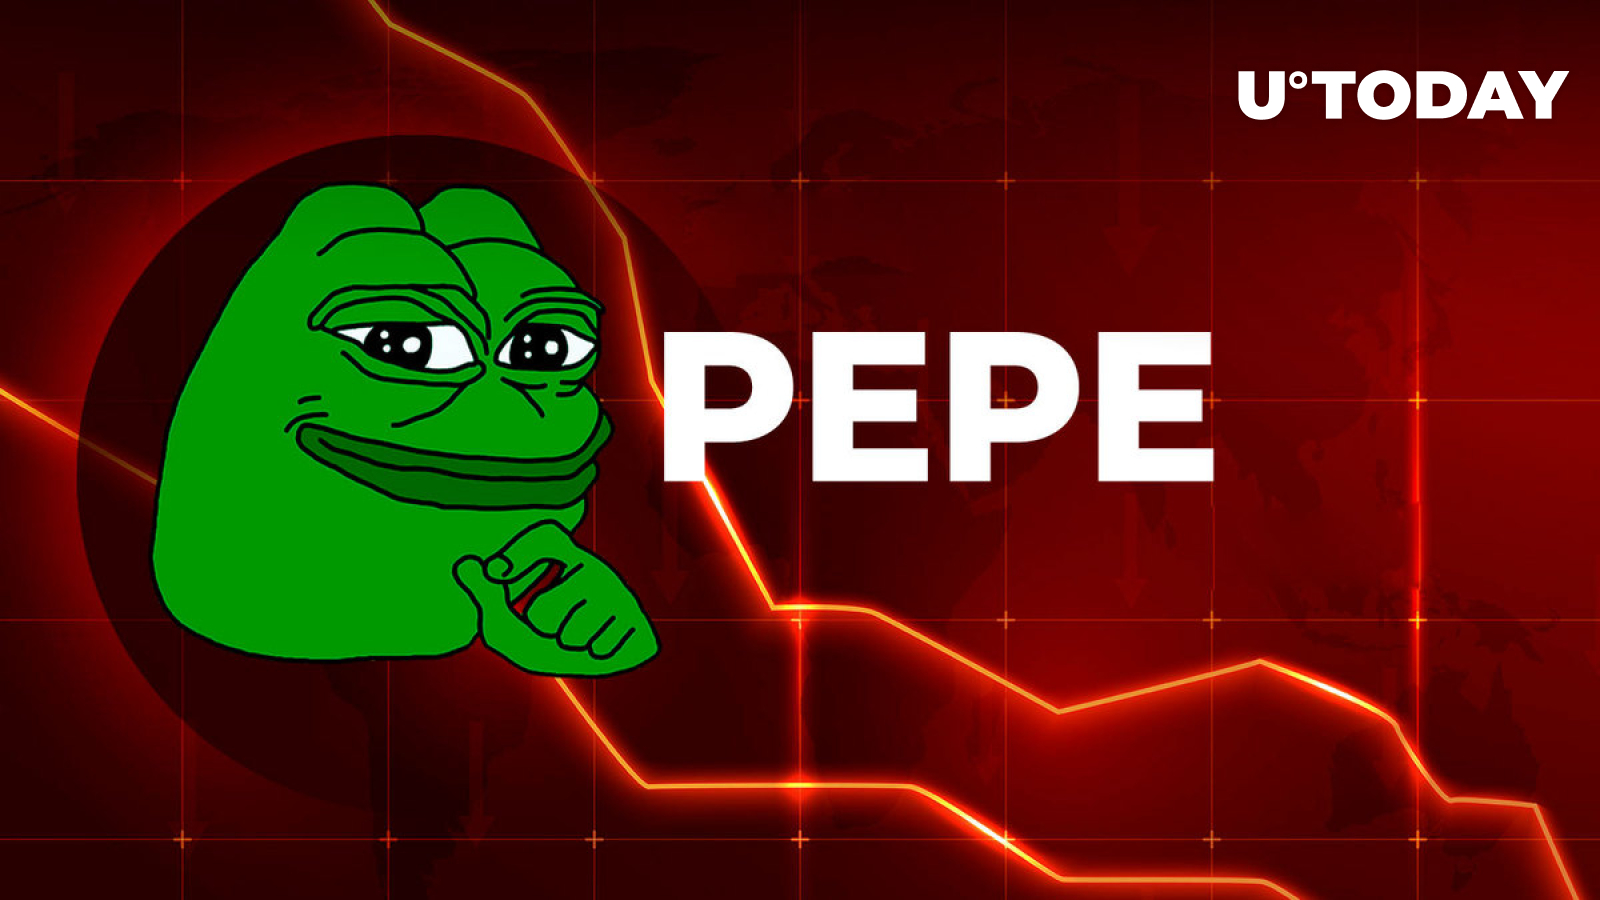 PEPE Down 15% to End Second Week in Losses, Where Is Frog Hype?